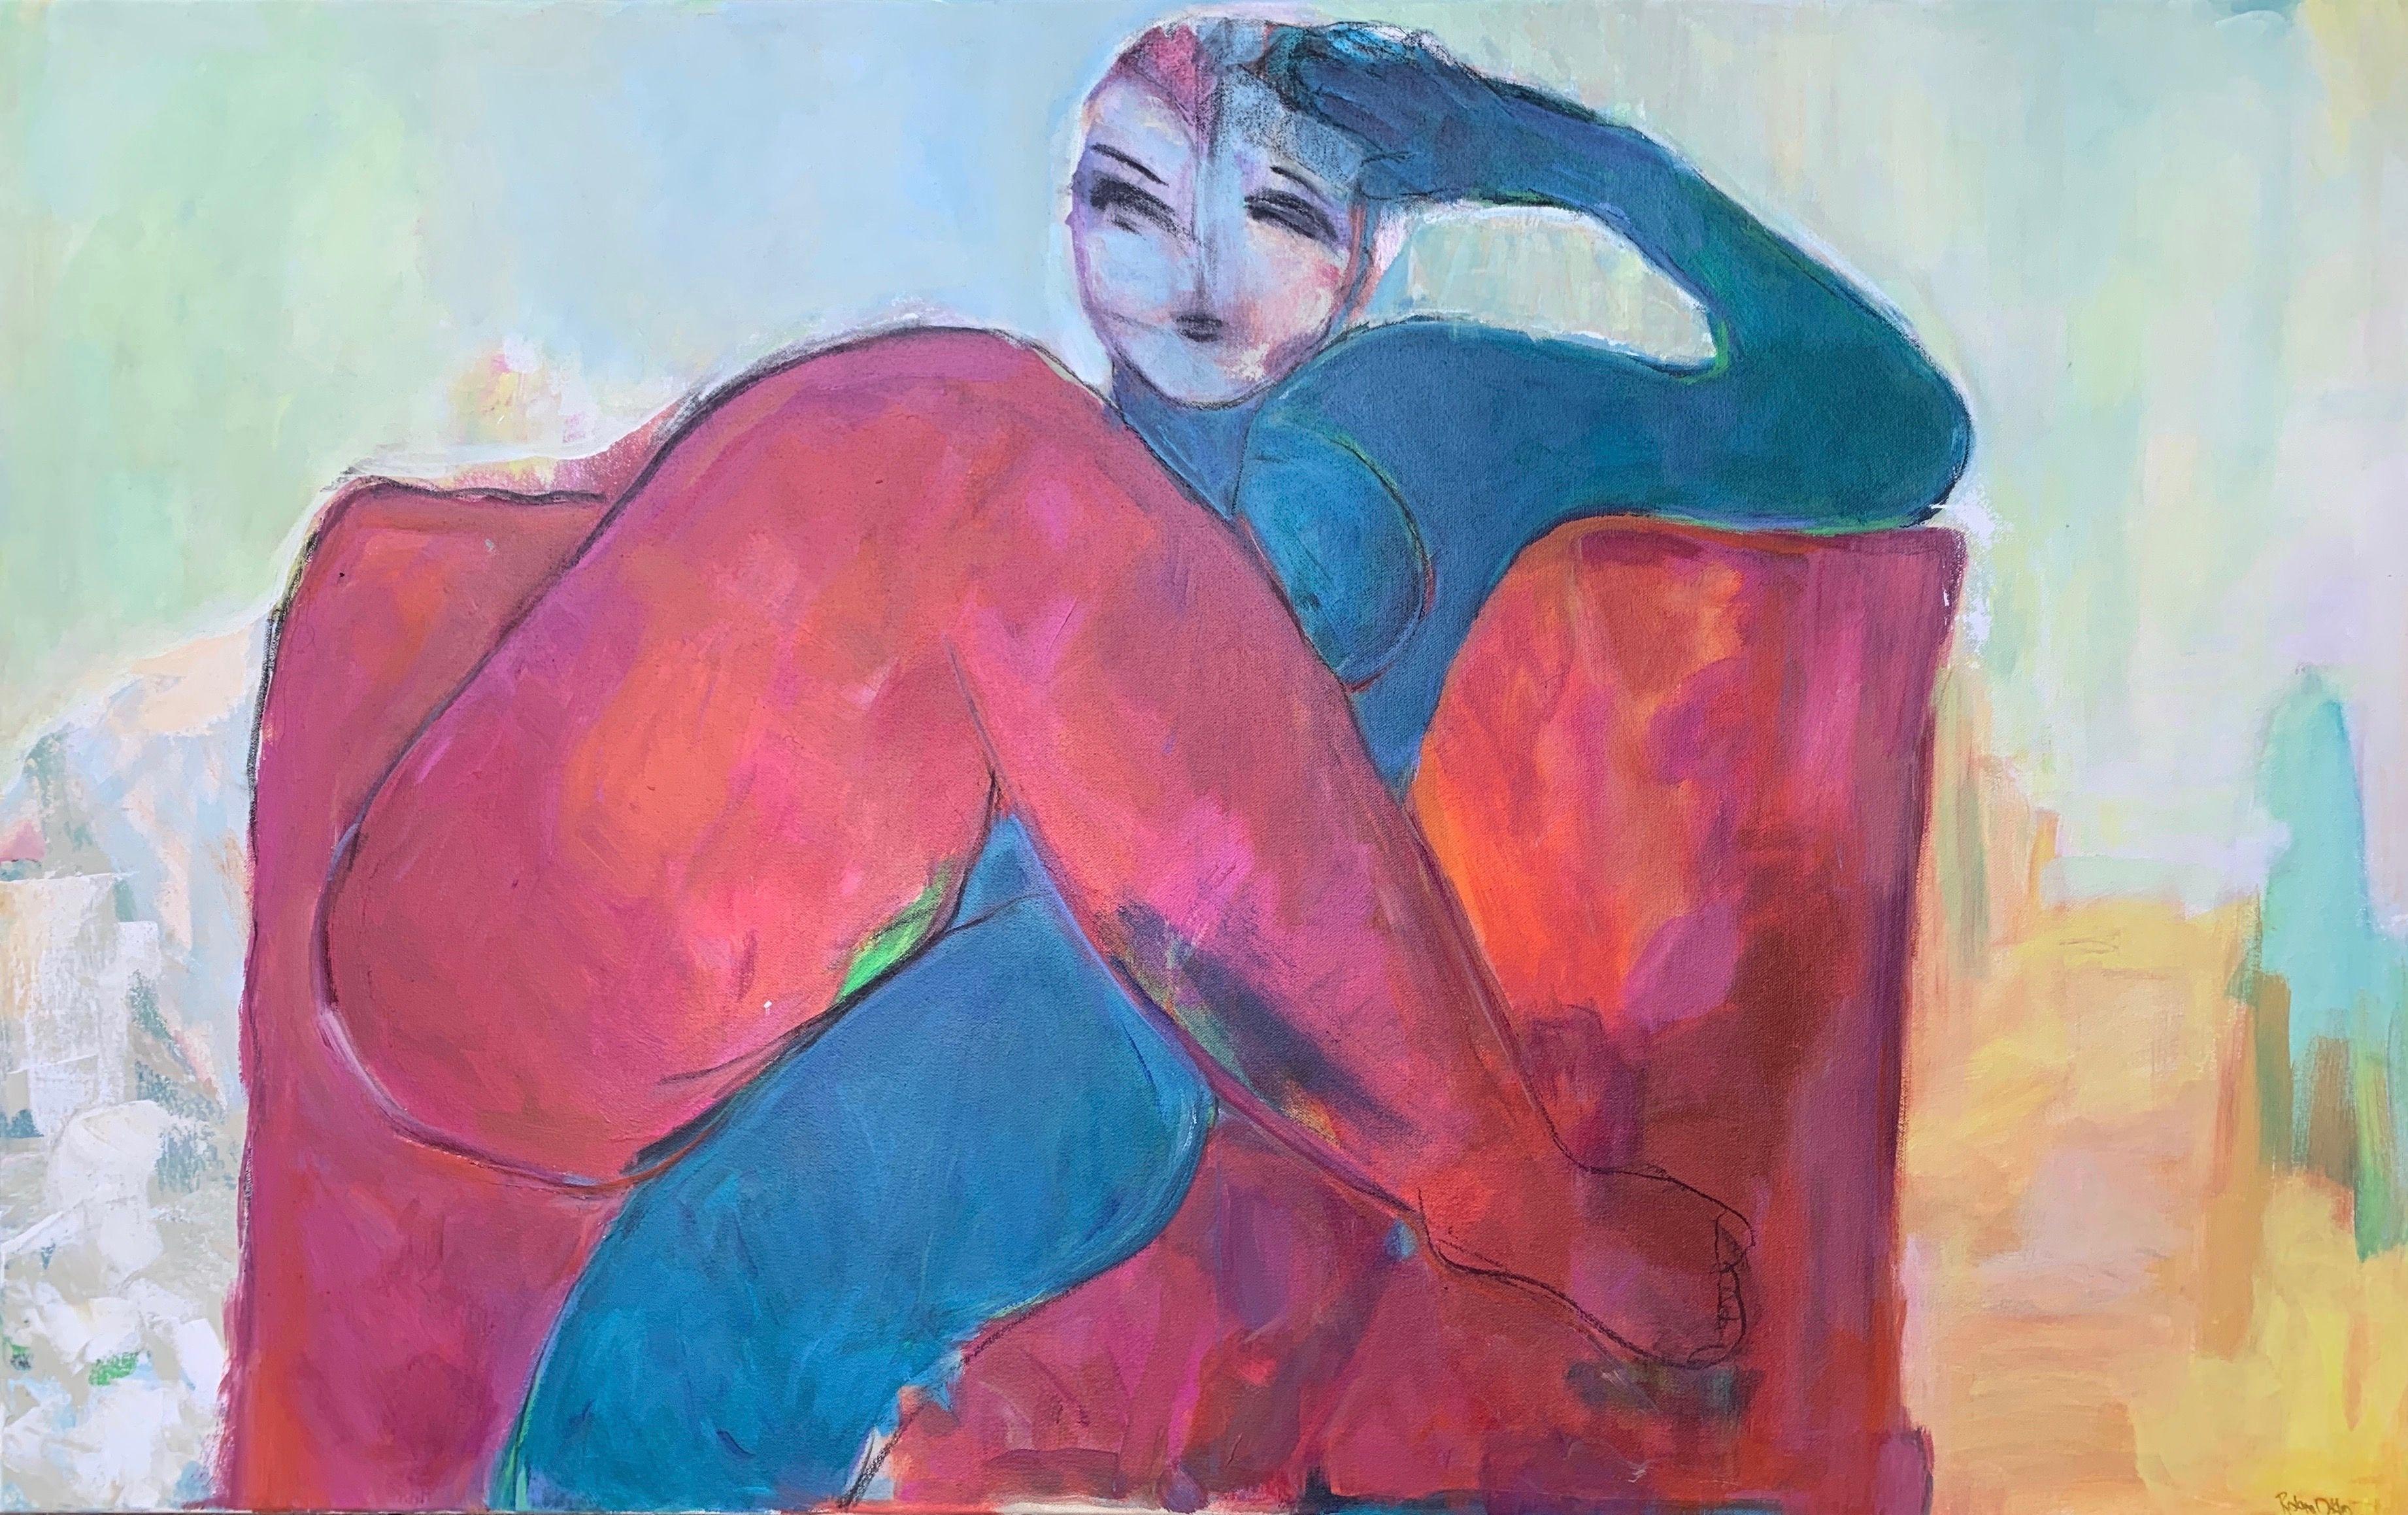 Expressionist portrait using vibrant color and form to draw us into a playful and engaging scene.  "The complexities and paradox of life are an ongoing source of contemplation and inspiration for my art." ~Robin Okun     :: Painting :: Contemporary